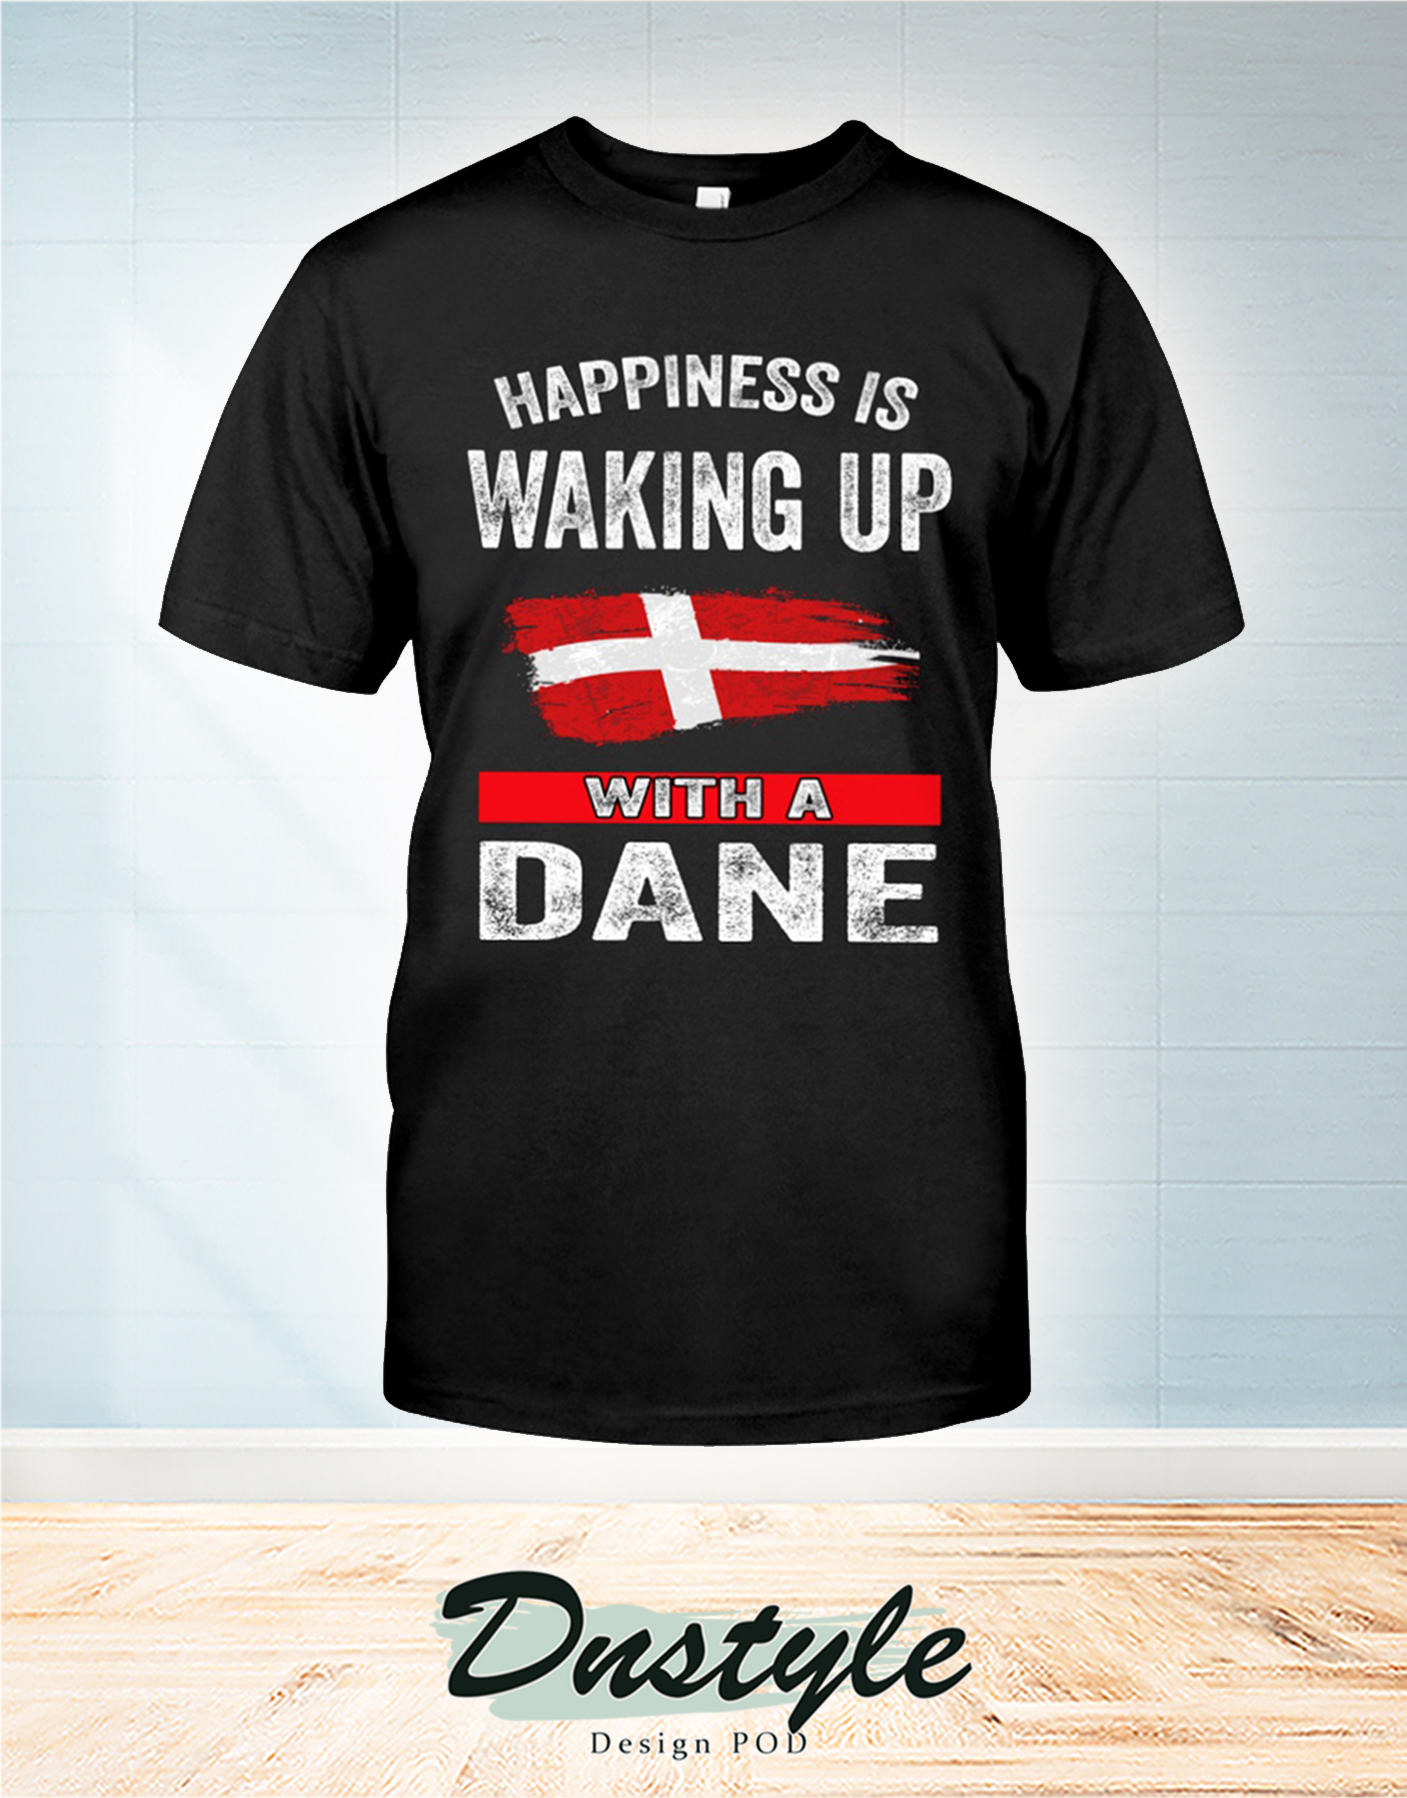 Happiness is waking up with a Dane t-shirt